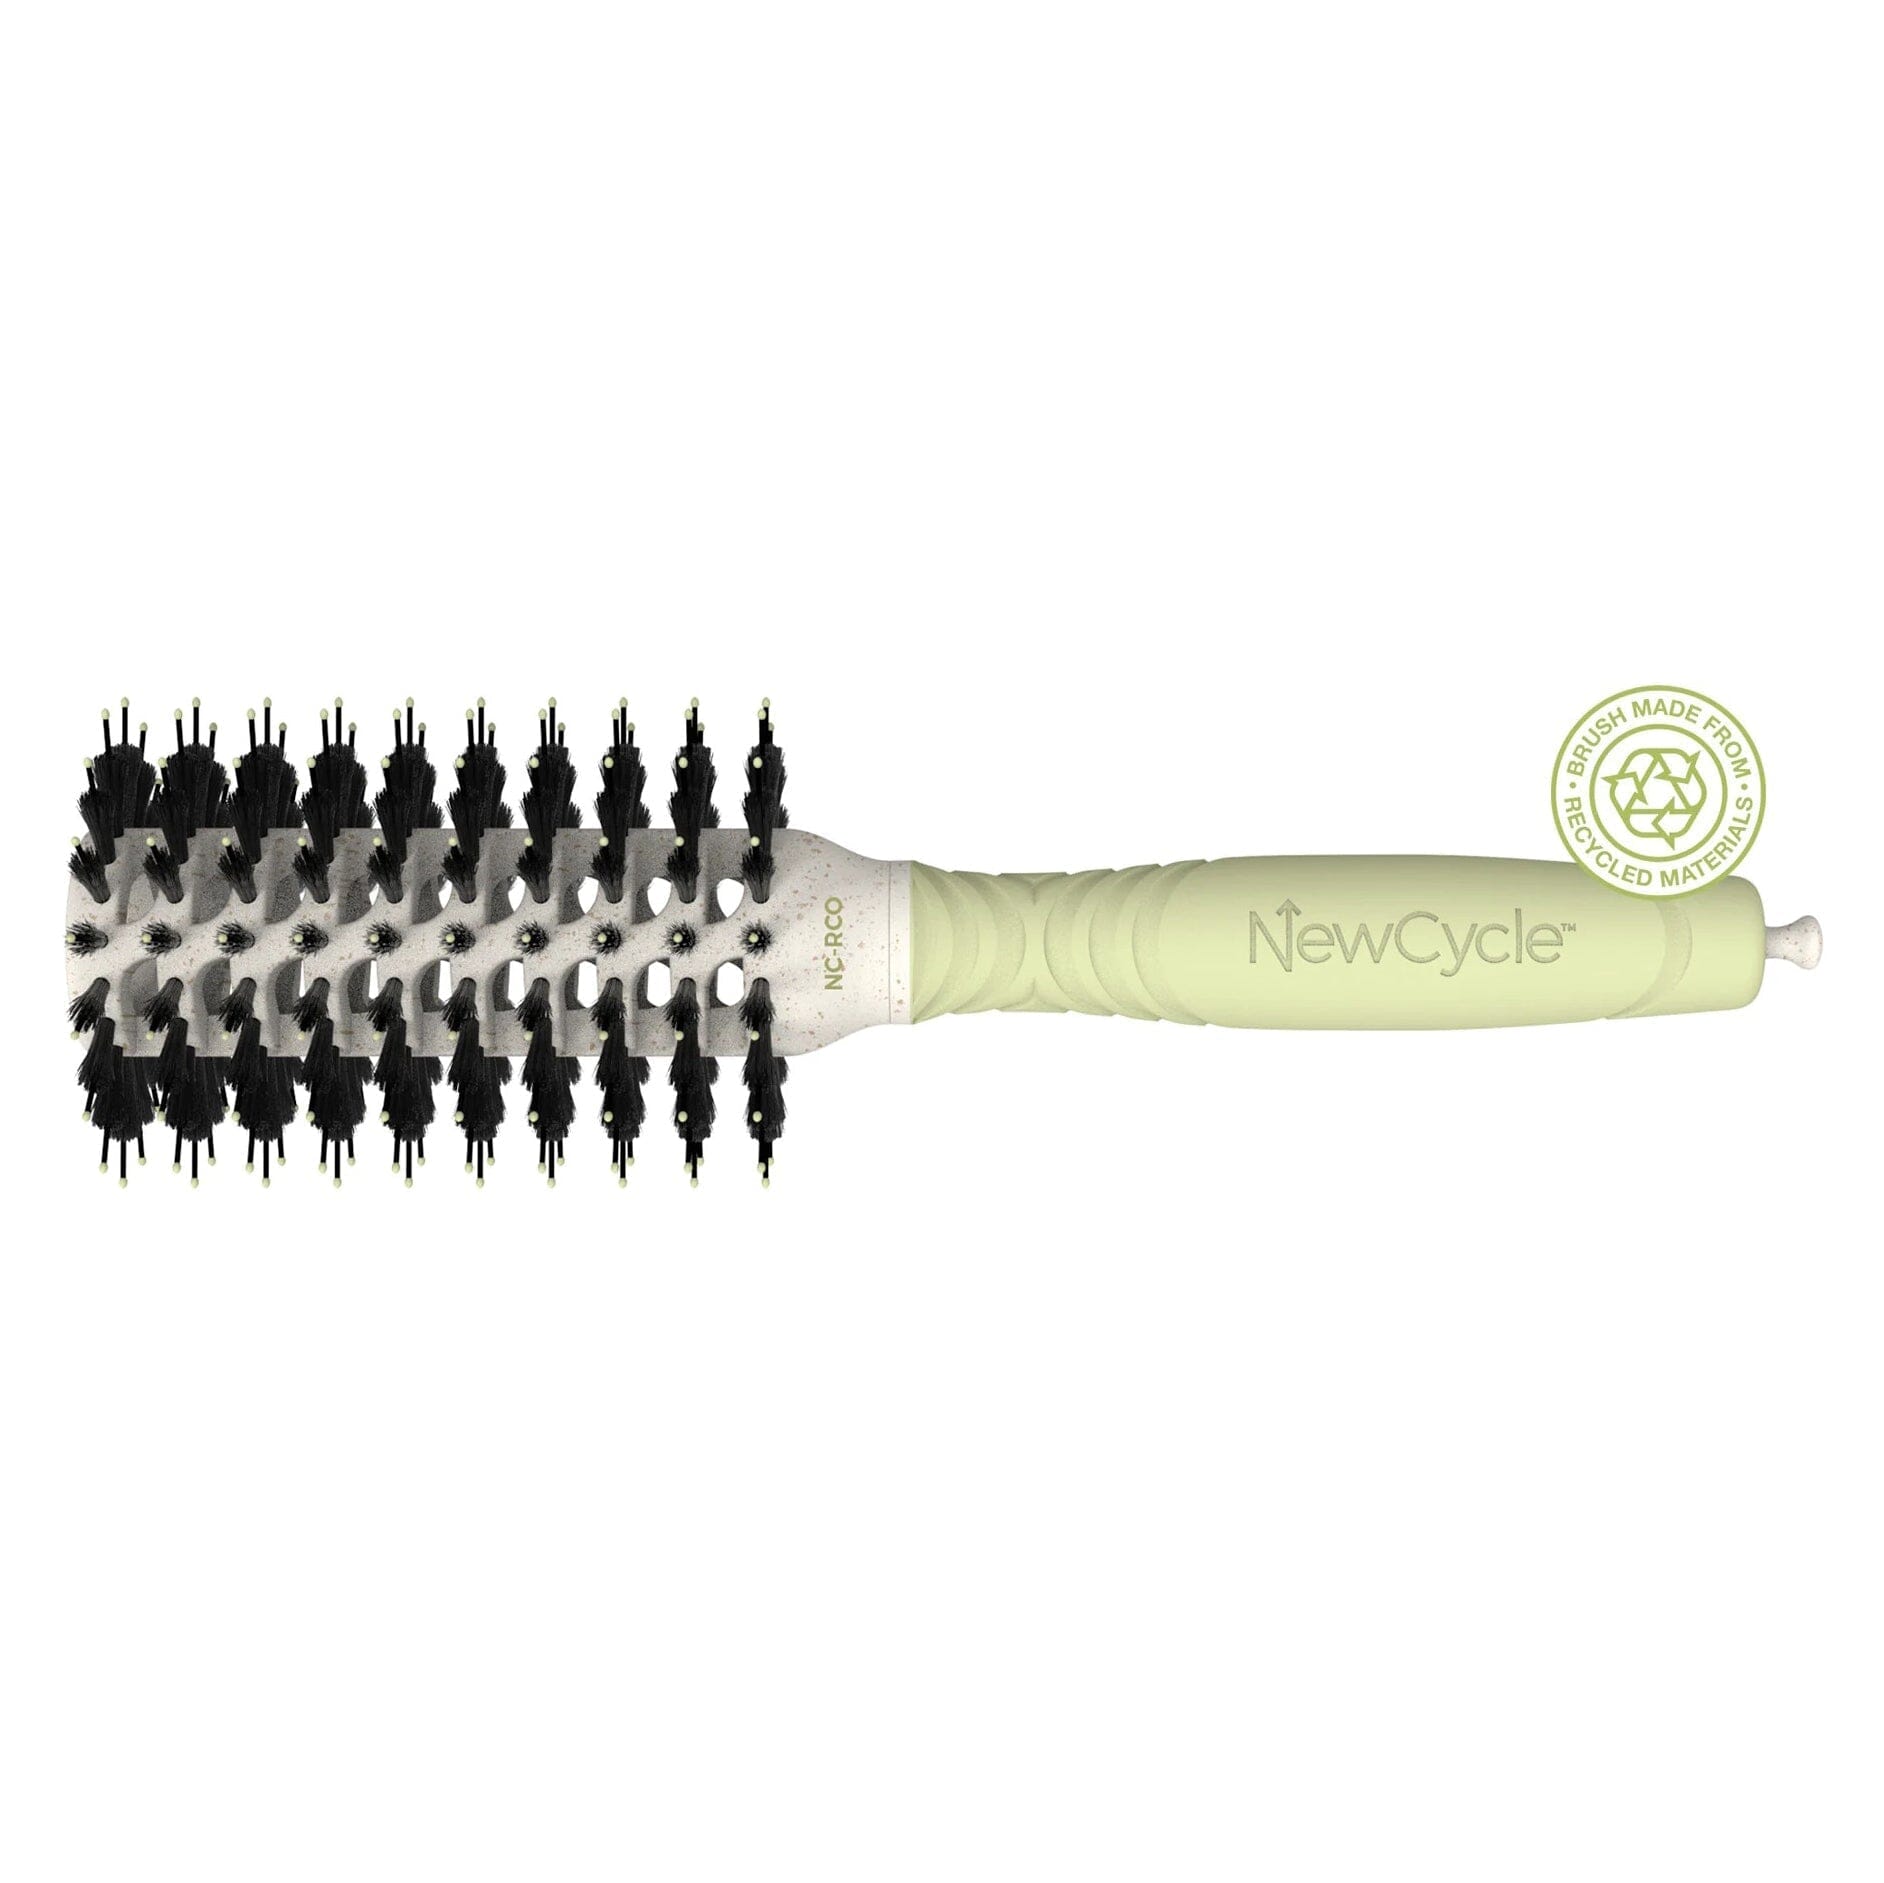 NCSBOX01 | NewCycle Styling Brushes | OLIVIA GARDEN COMBS & BRUSHES OLIVIA GARDEN 